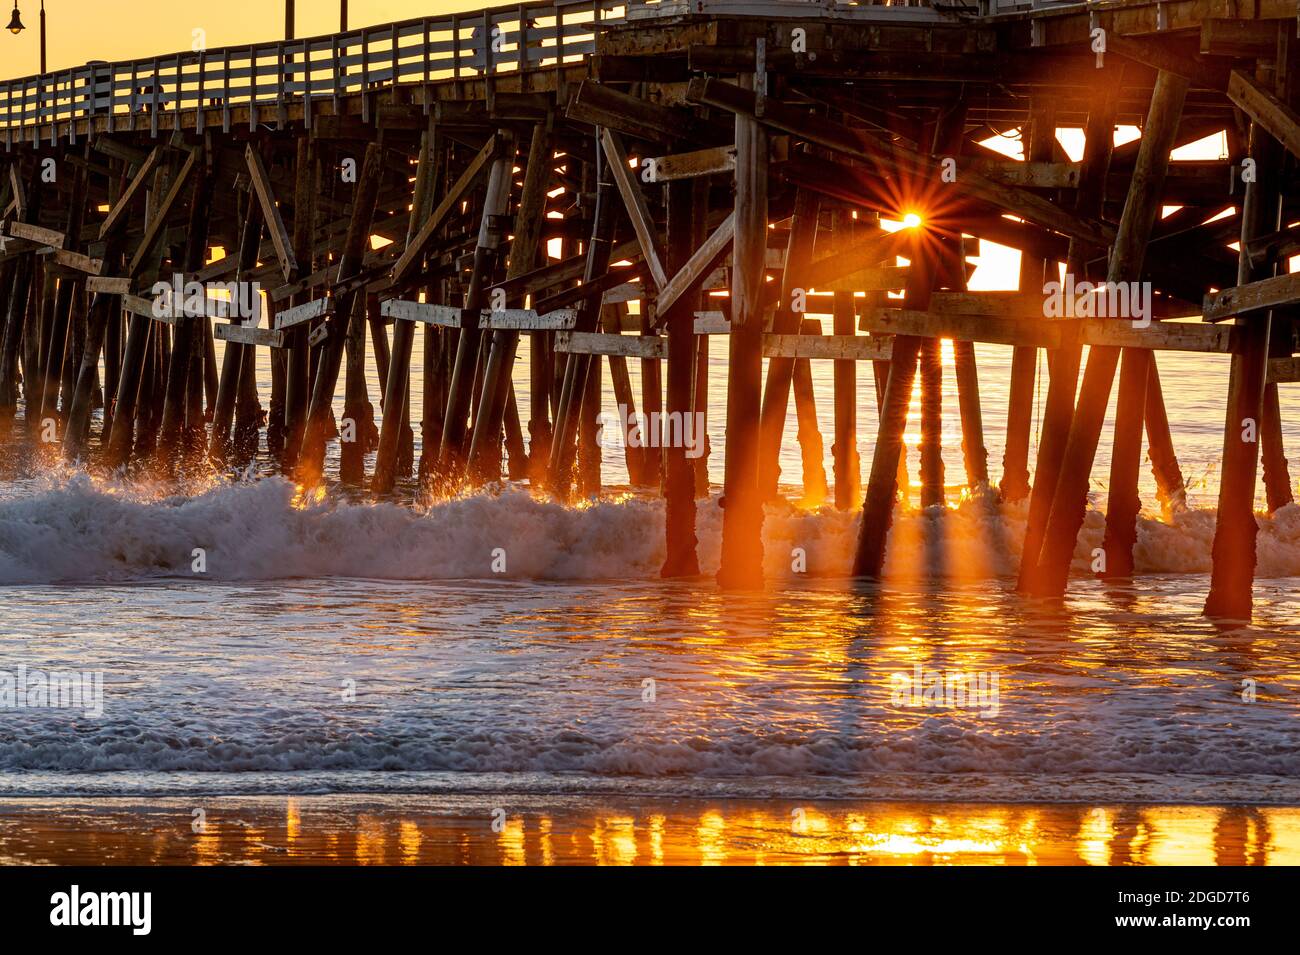 The golden rays of the setting sun stream through a wooden pier structure, shining on the waves and the glassy beach below. Stock Photo